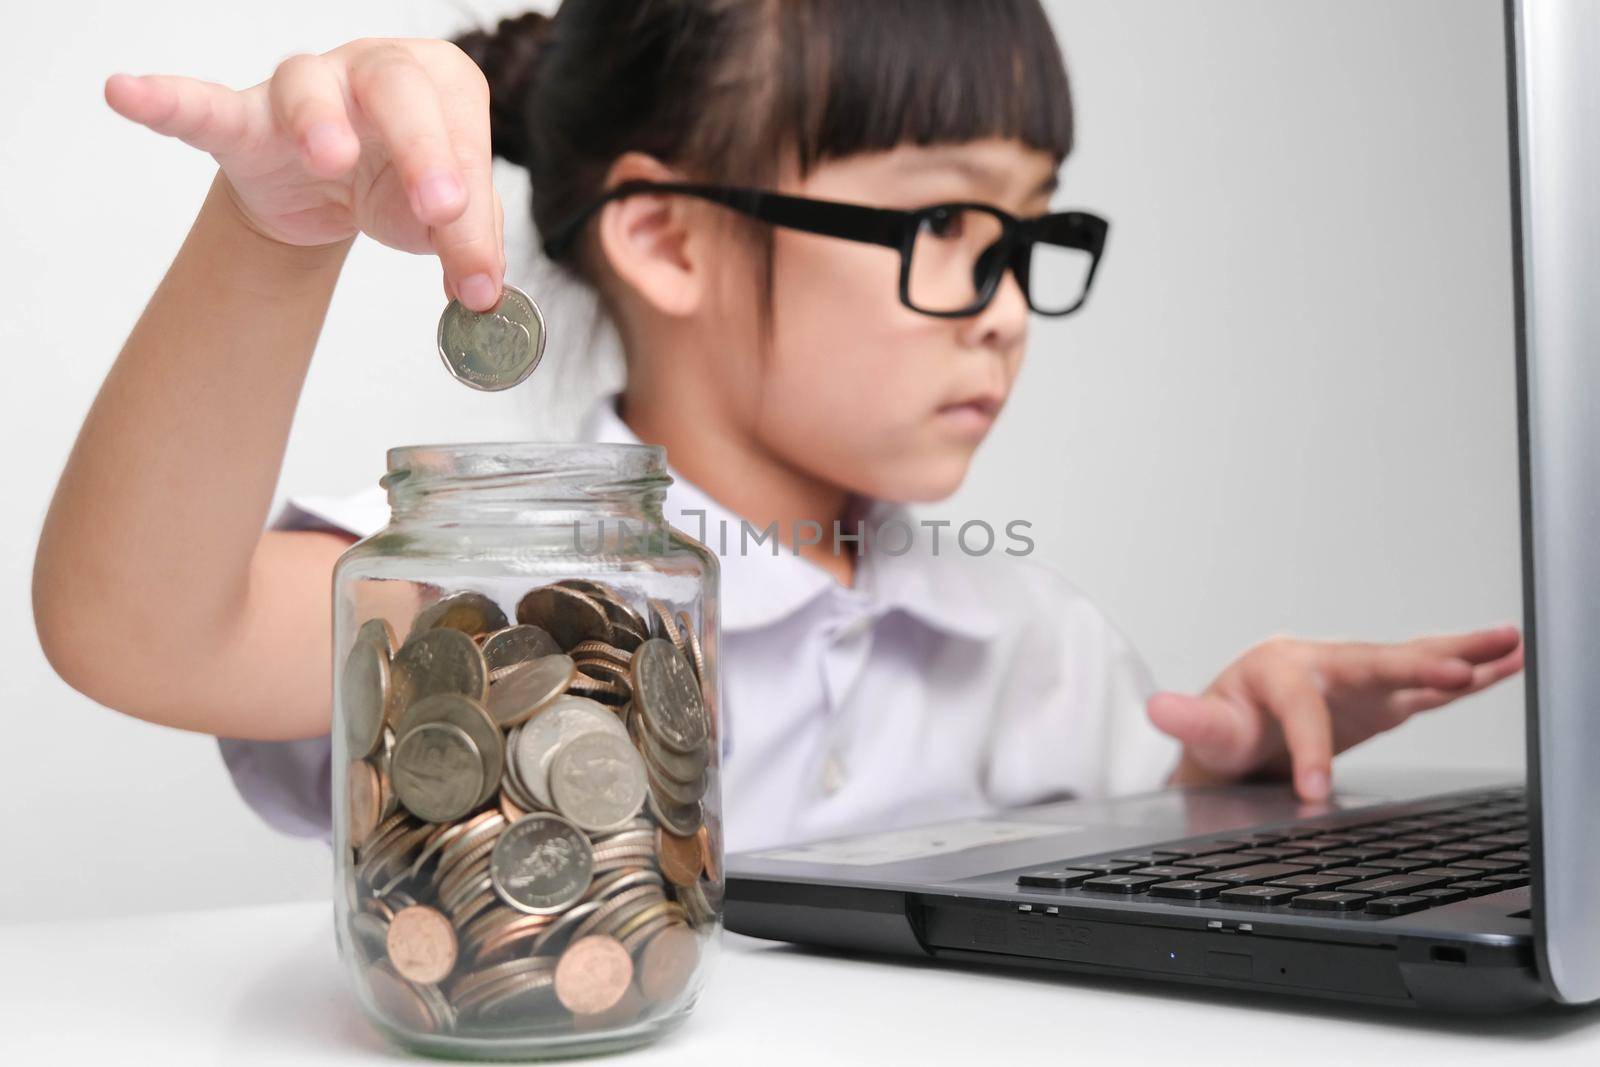 Little businesswoman puts a coin in a glass jar on a table while working with laptop in office. Children and business concept by TEERASAK